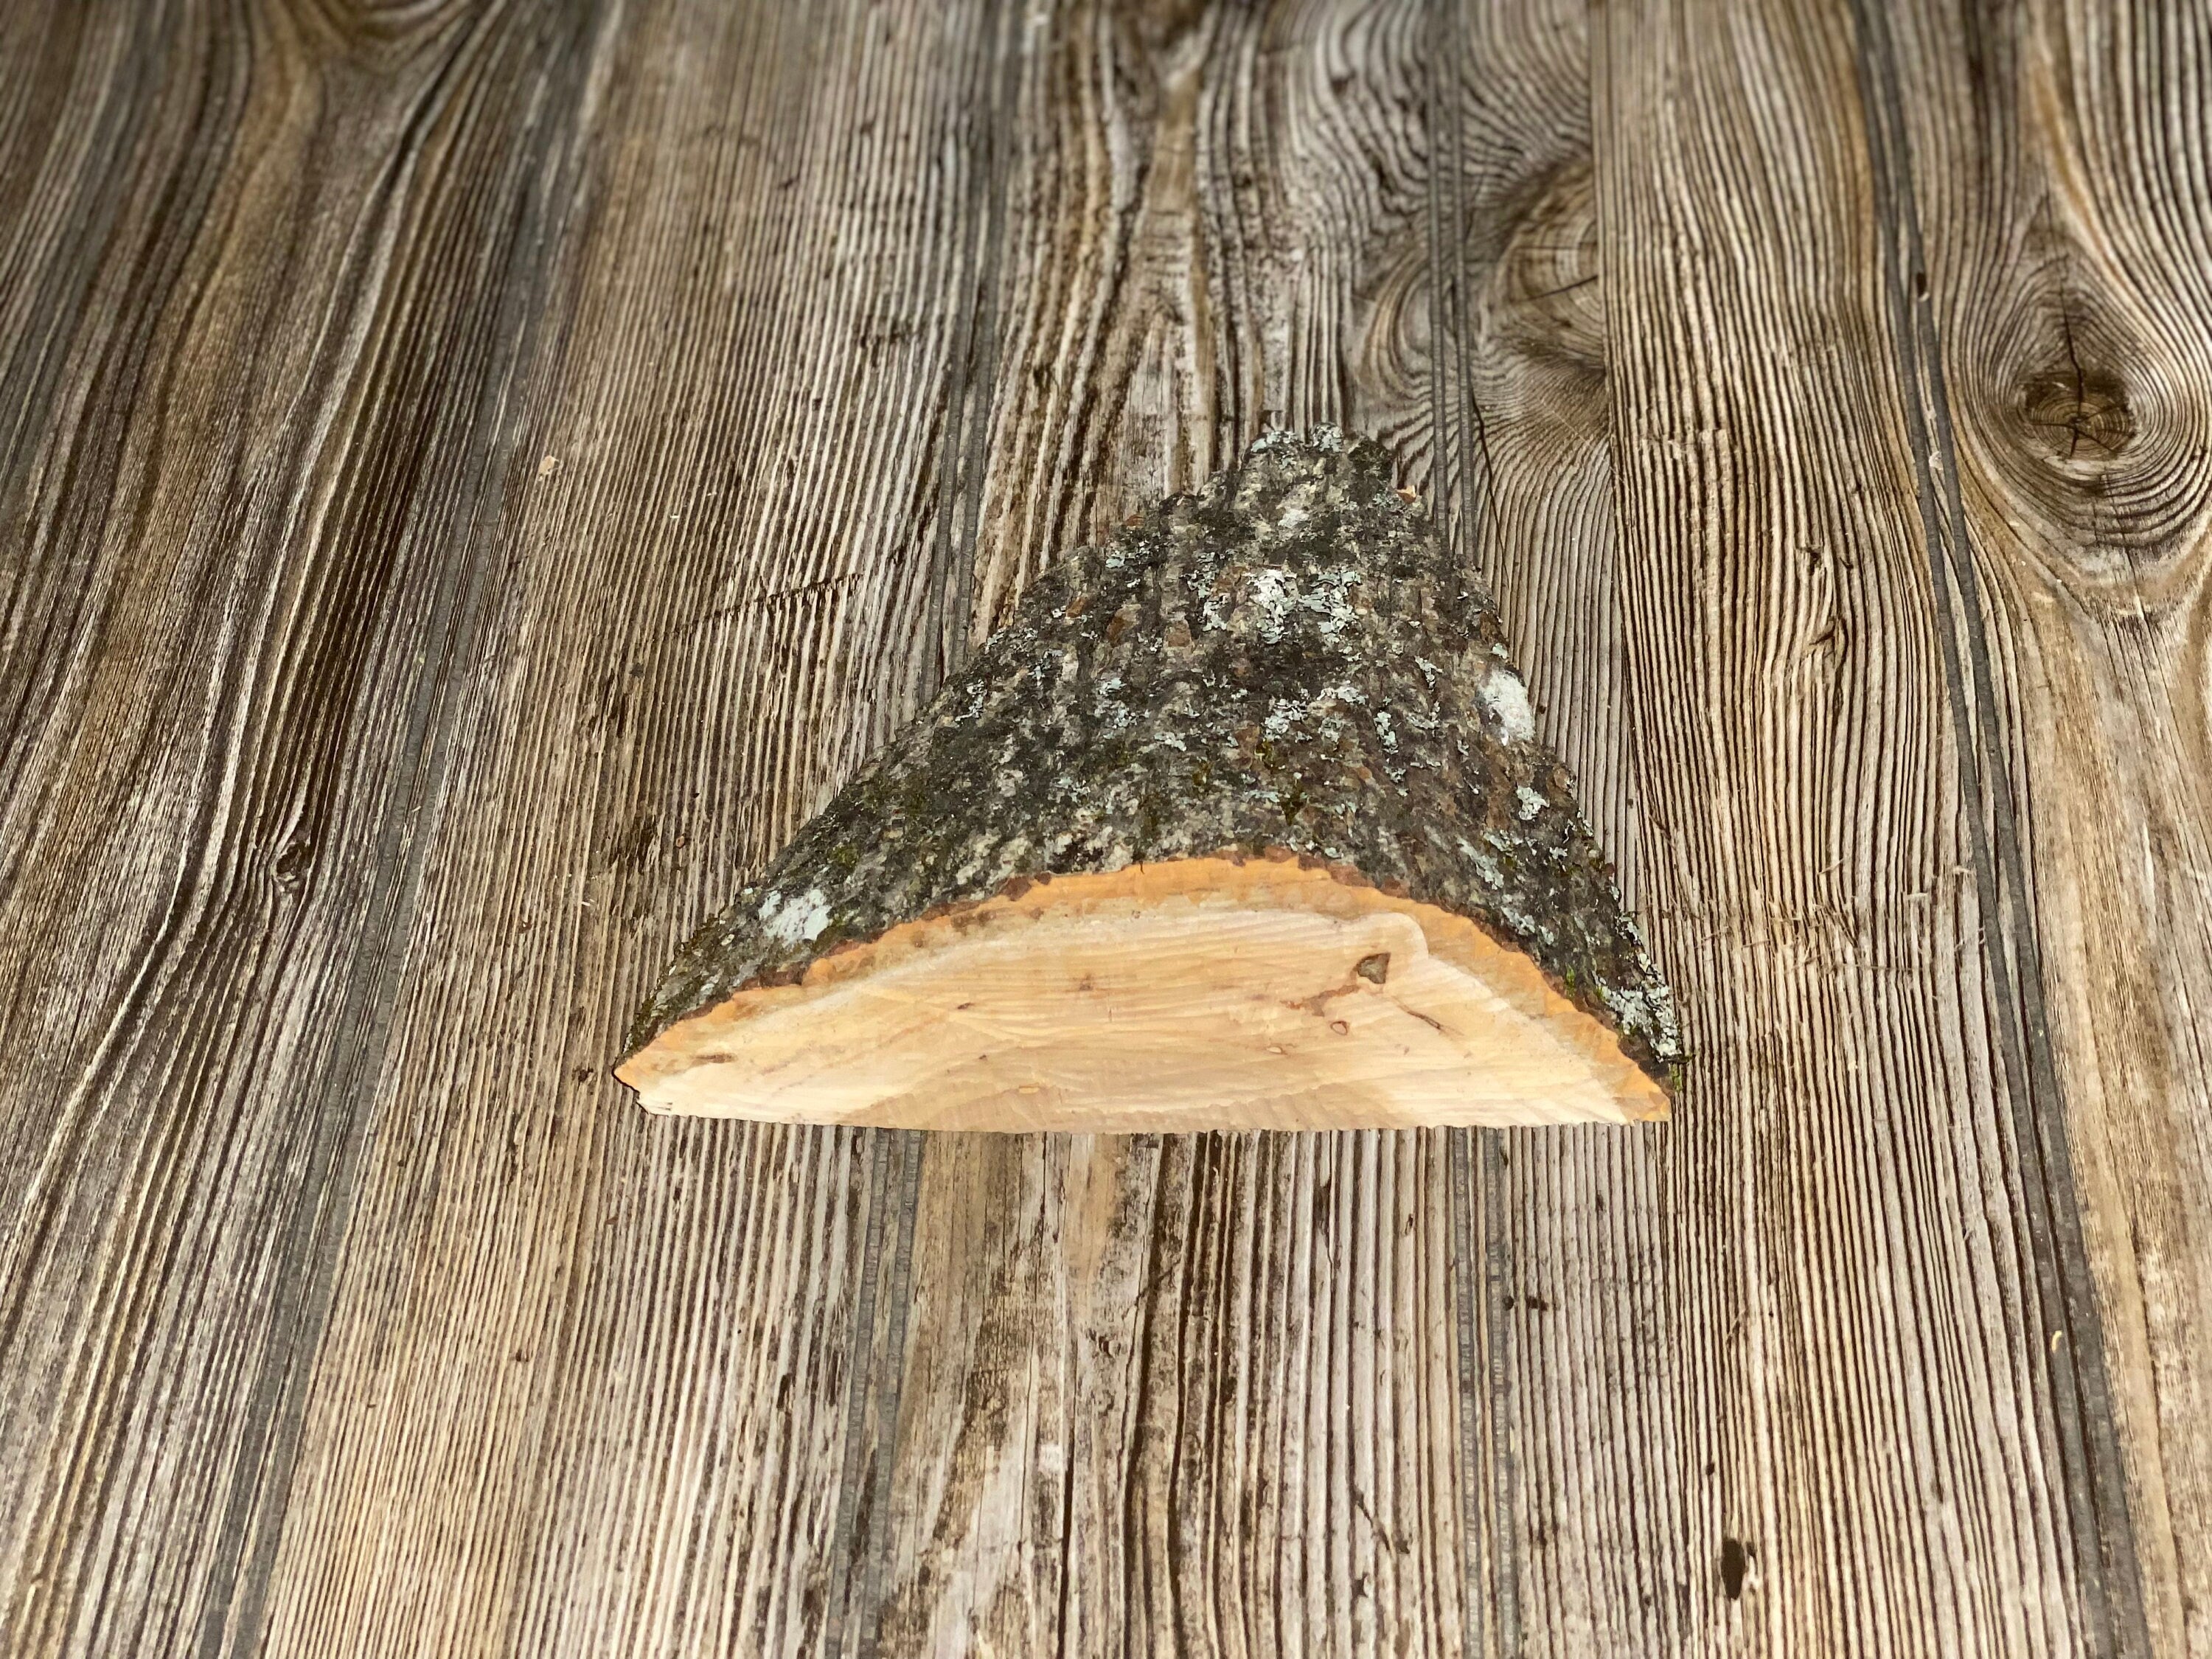 Triangle Shaped Wood Wedge, Wood Slice, Approximately 7.5 Inches Long by 7 Inches Wide and 2 Inches Tall